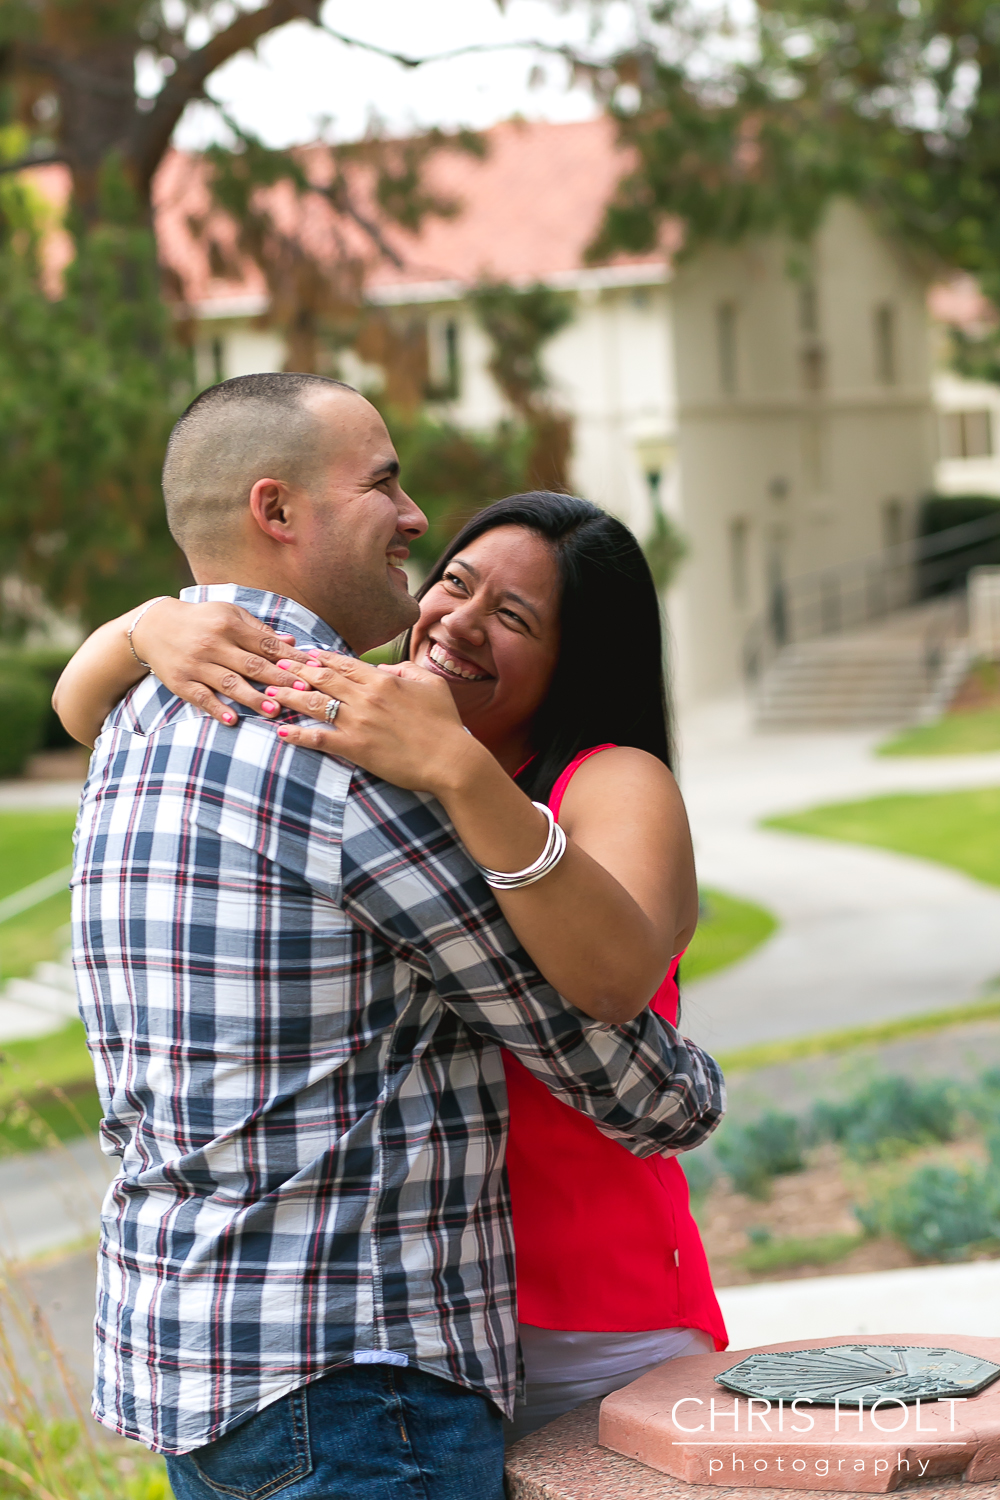 whittier college engagement, love, college sweethearts, chris holt photography, los angeles wedding photography